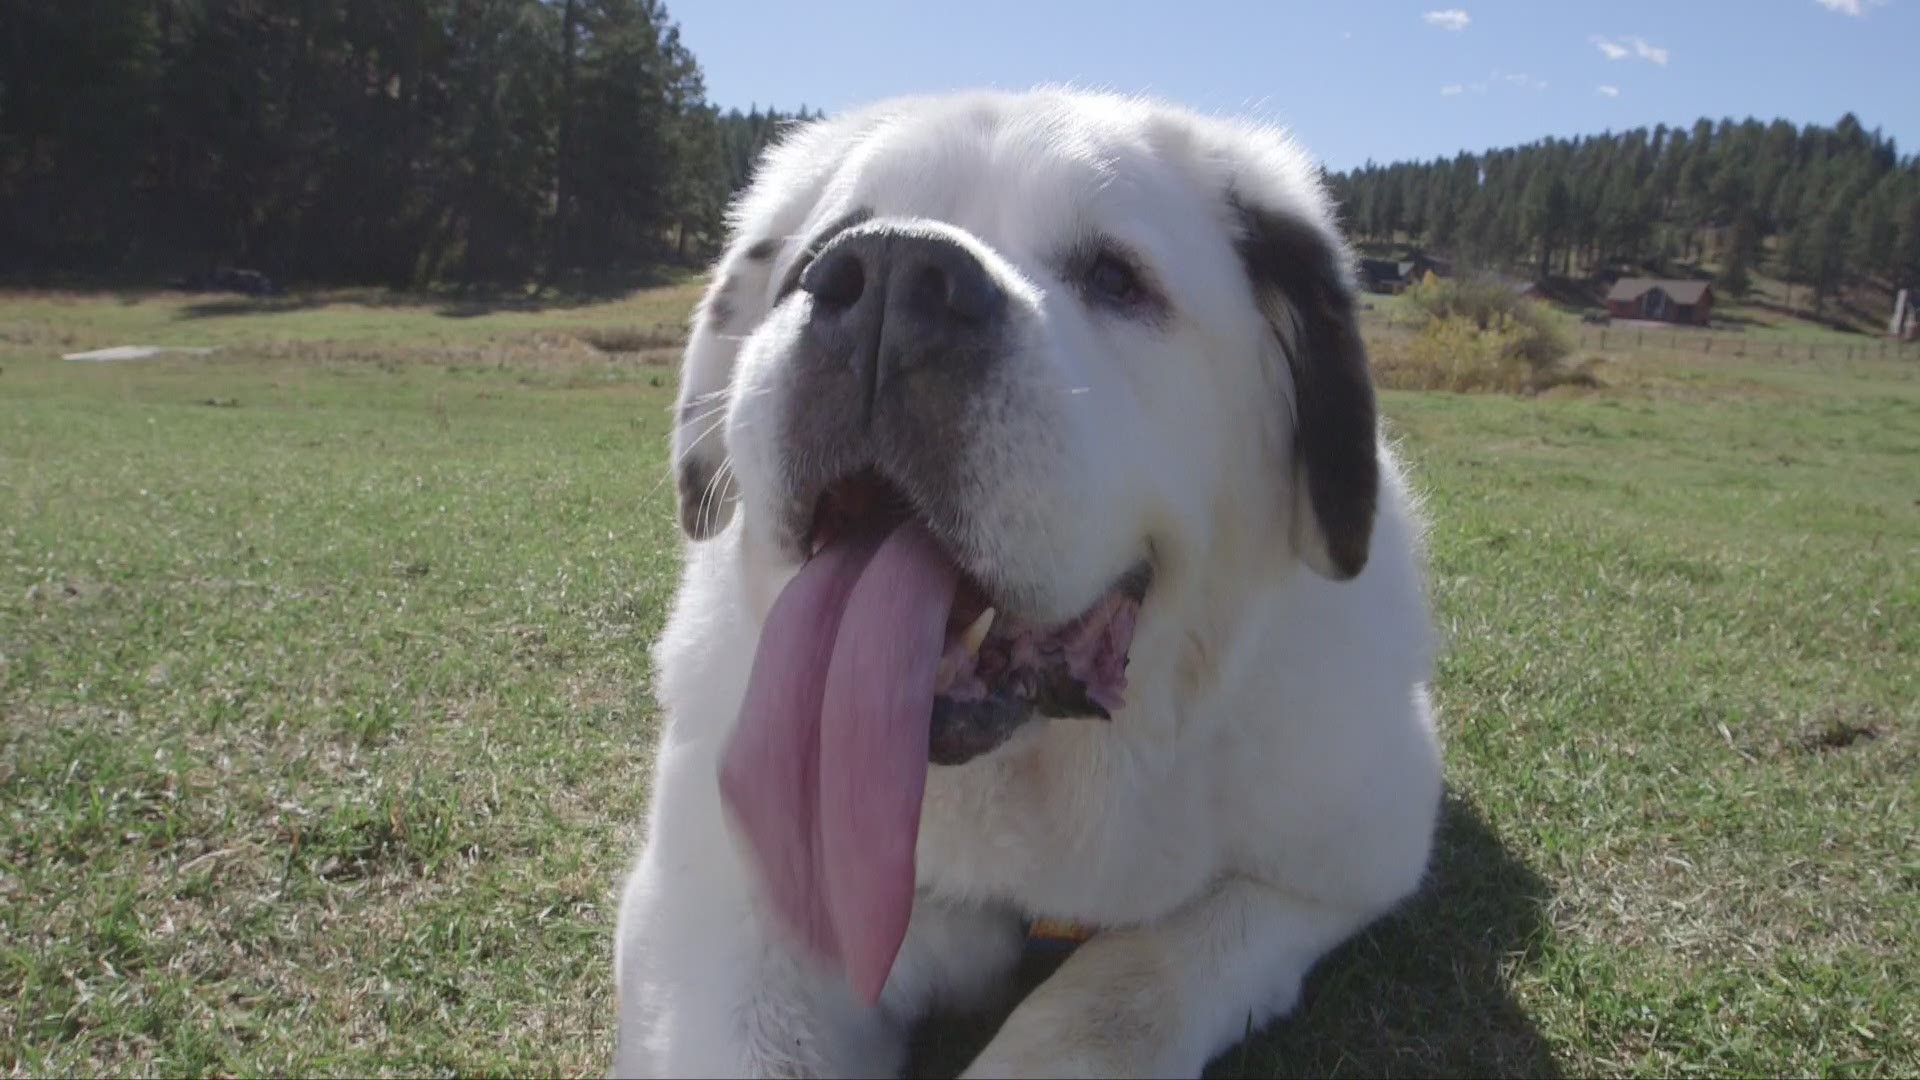 Mochi now has two titles to her name, a very good girl and world record holder. The Saint Bernard has licked the competition and won the world record for the longest tongue.